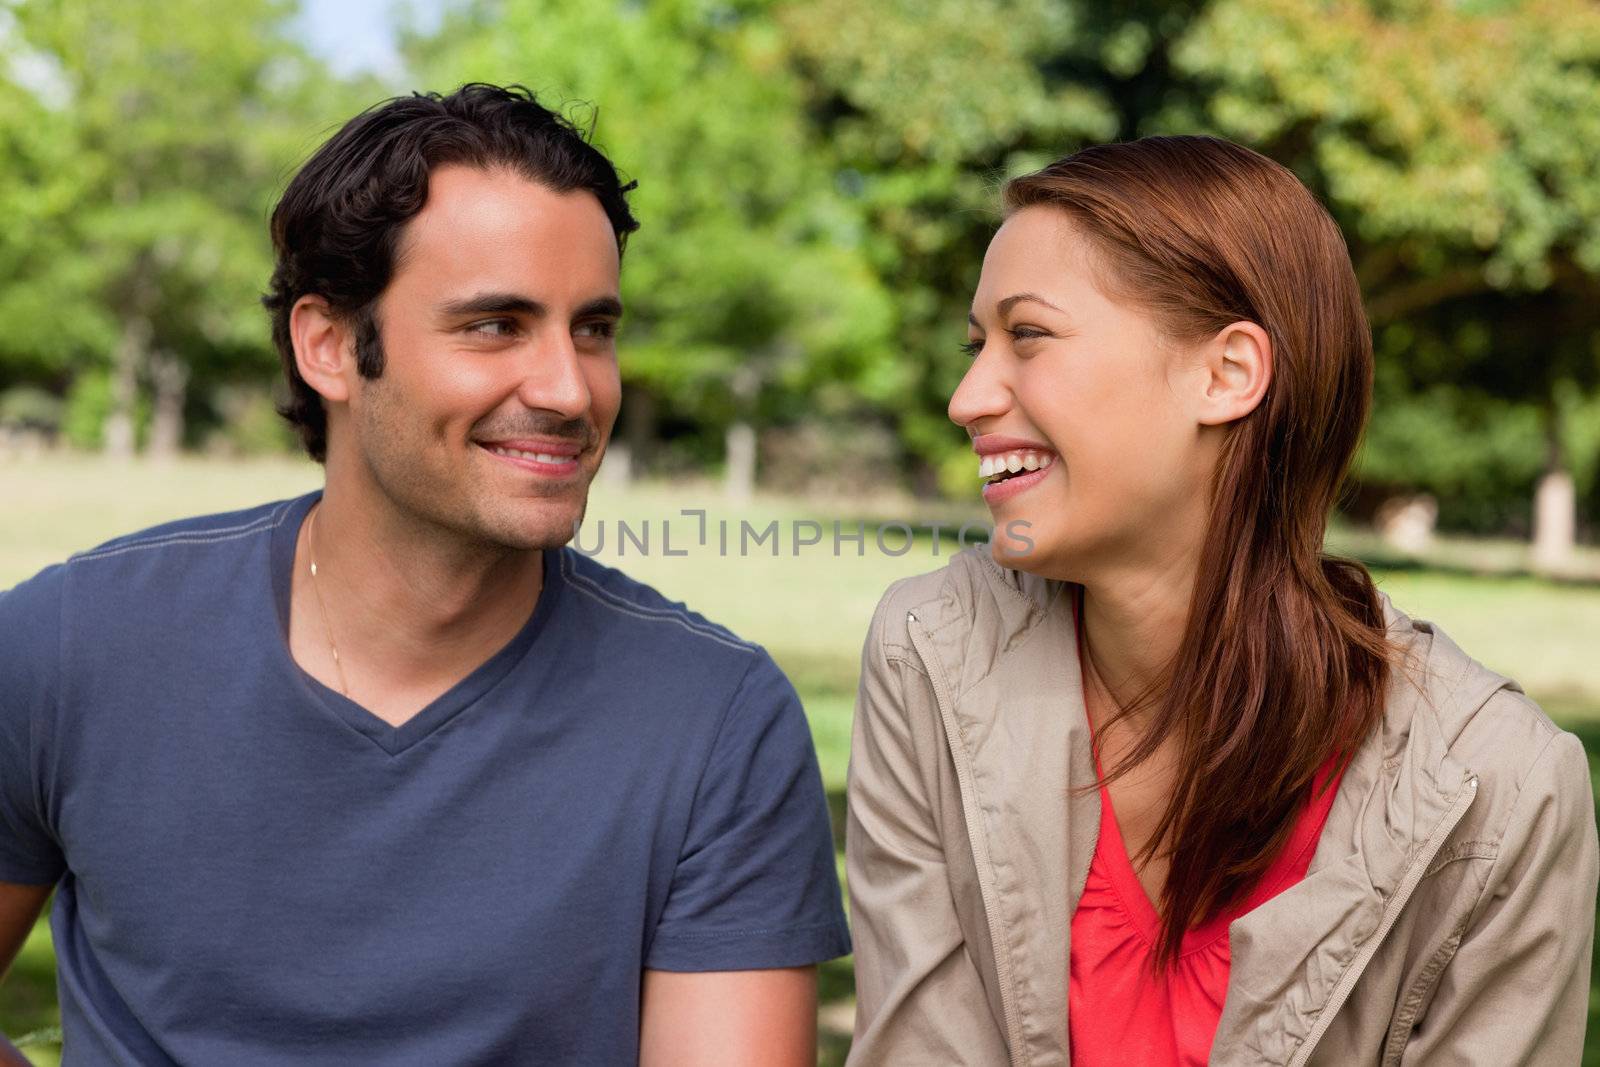 Man is grinning while he watches his friend who is gleefully laughing in a bright grassland area